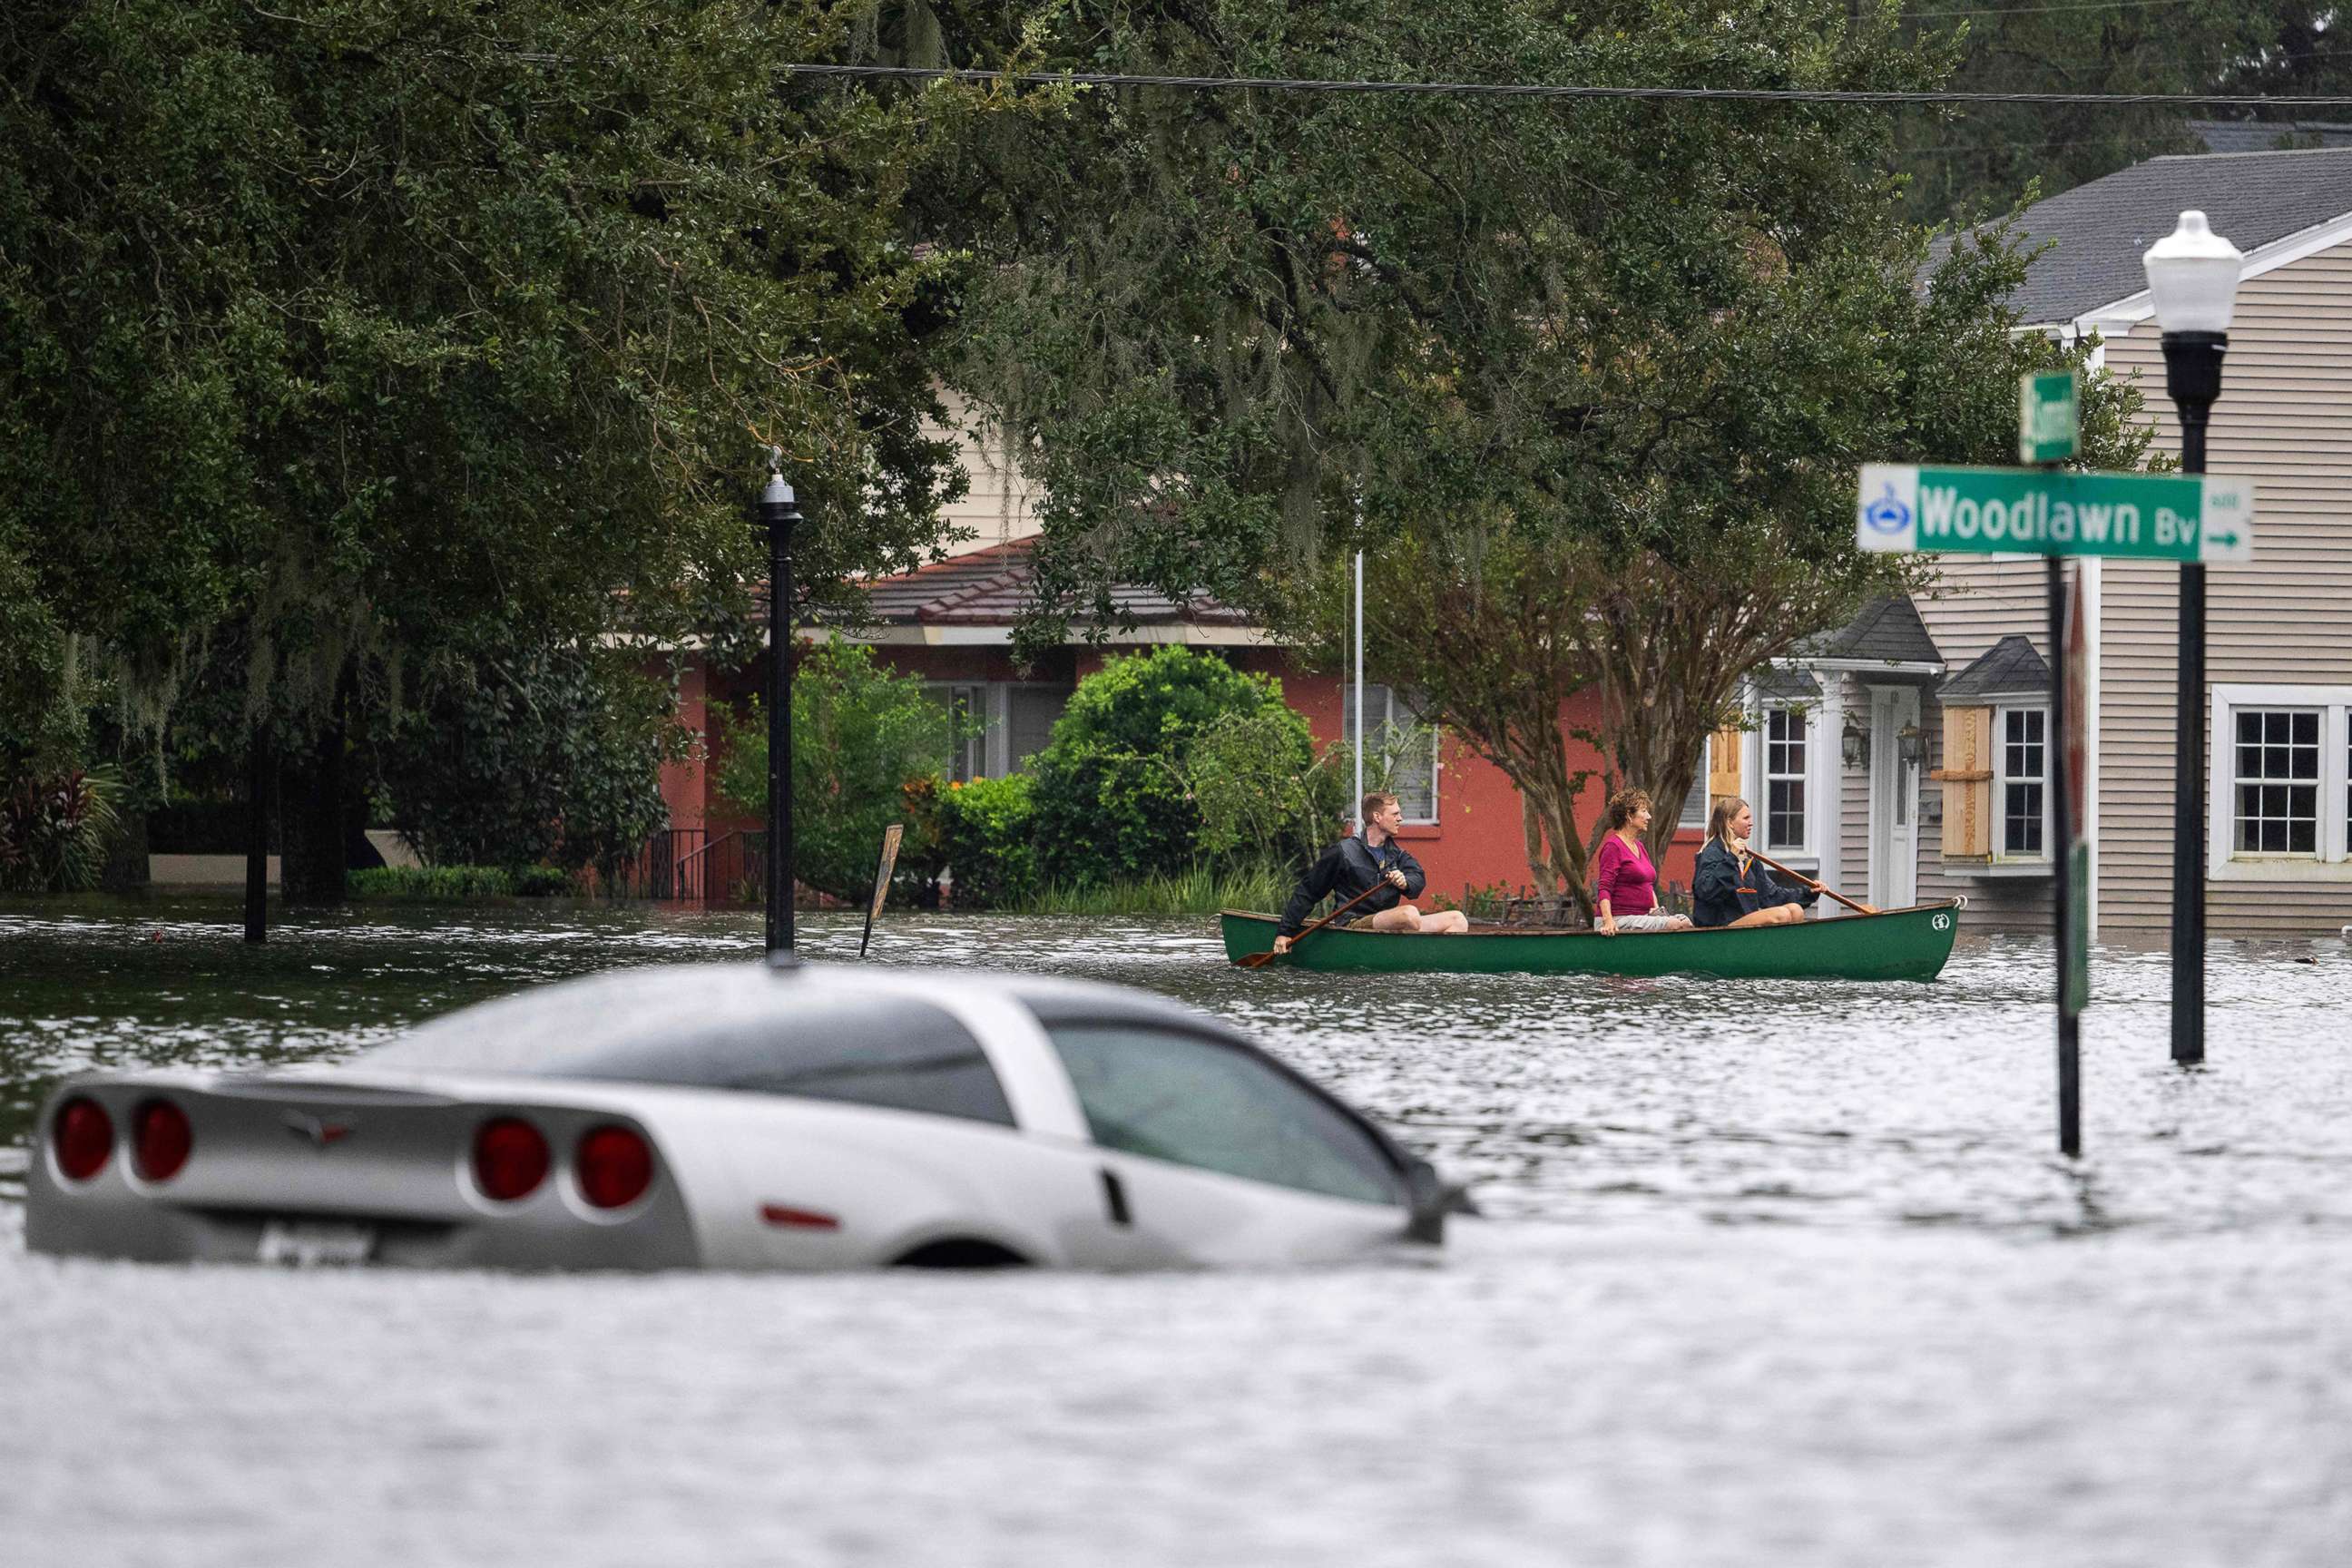 PHOTO: People paddle a canoe next to a submerged Chevy Corvette in the aftermath of Hurricane Ian in Orlando, Fla., Sept. 29, 2022. 